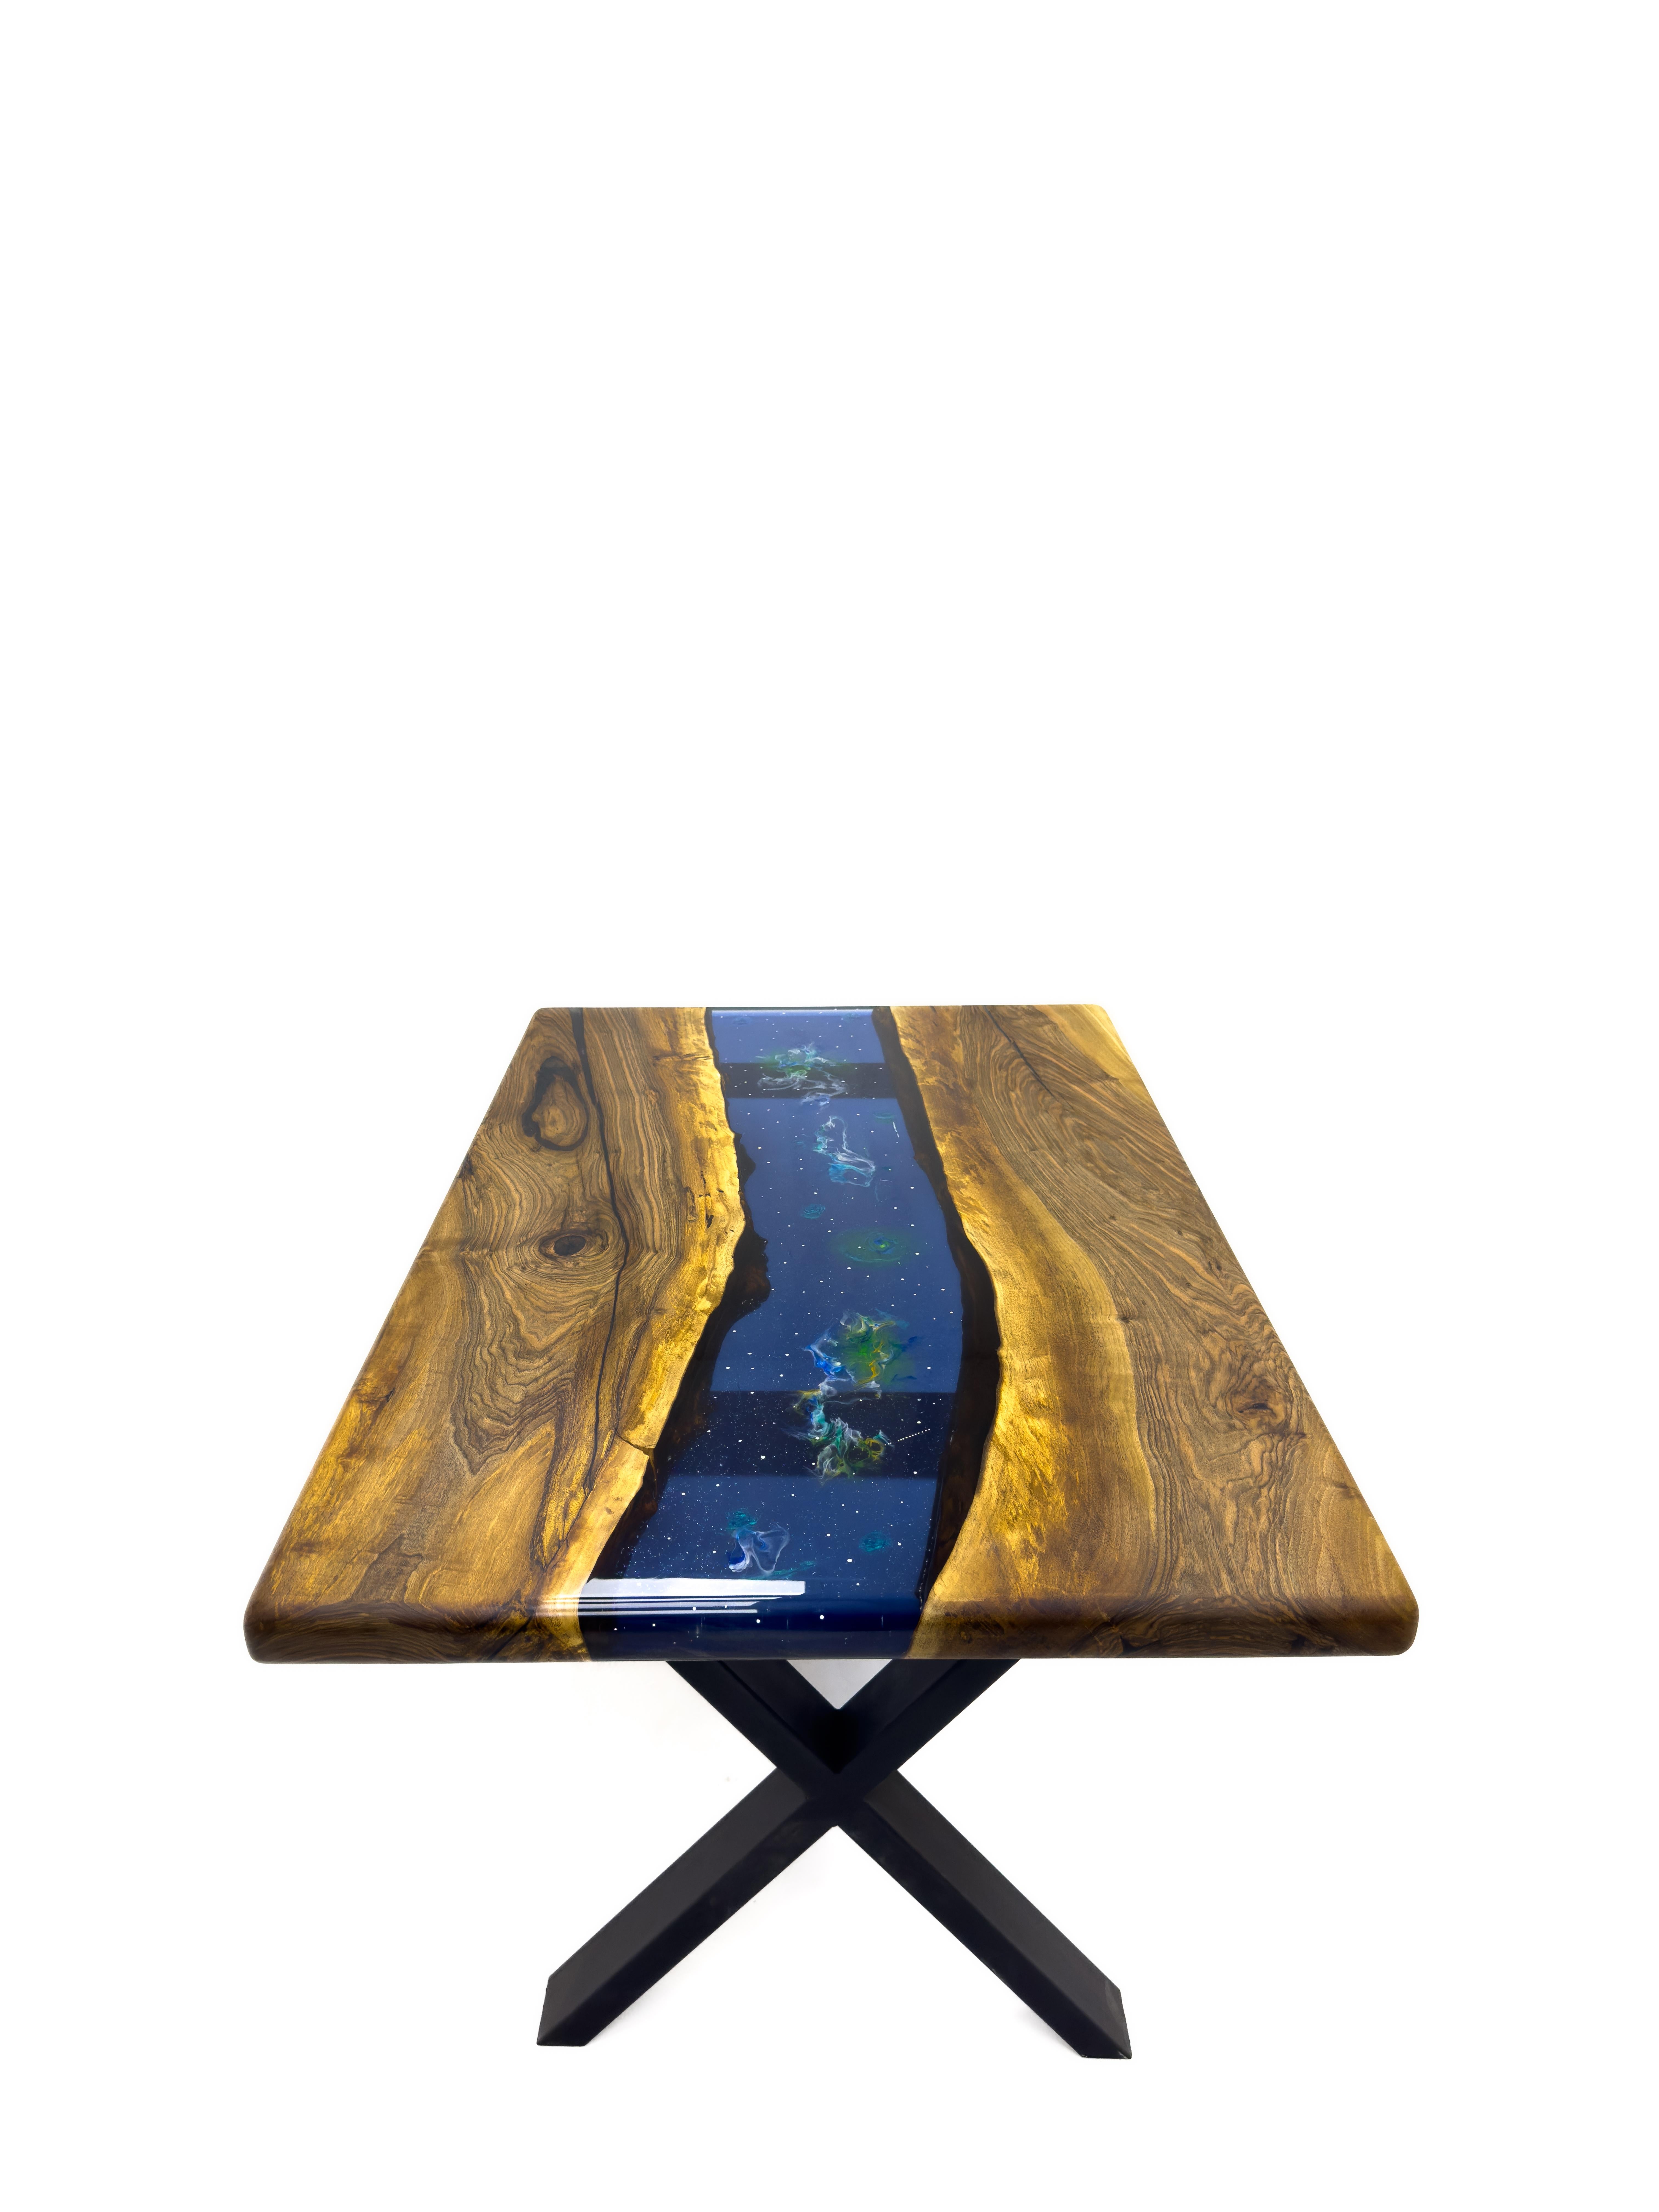 Custom Clear Epoxy Resin Dining Table 

This table is made of 500 years old Walnut Wood. The grains and texture of the wood describe what a natural walnut woods looks like.
It can be used as a dining table or as a conference table. Suitable for